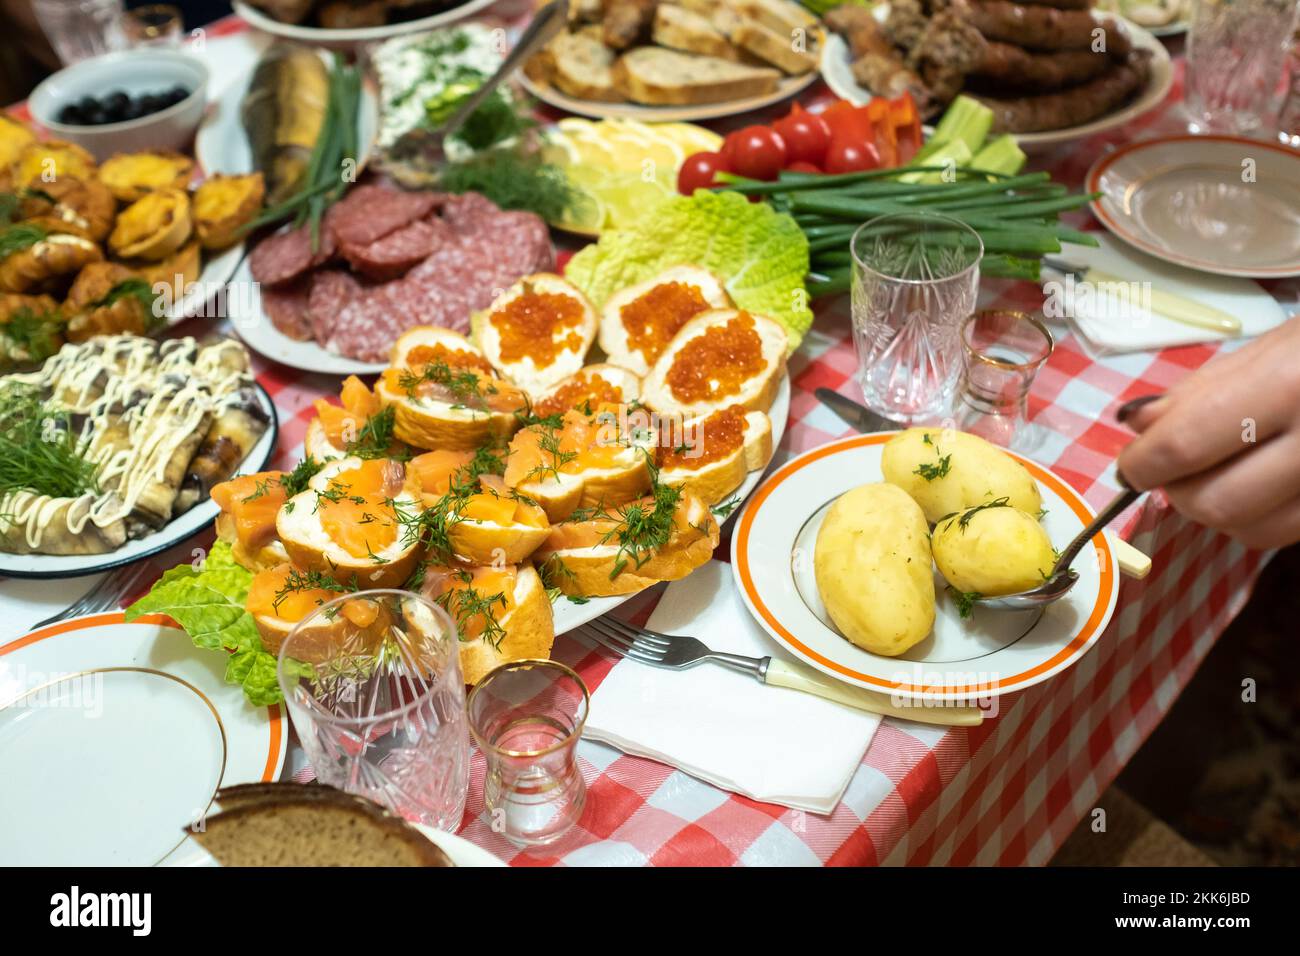 A lot of different food on the Banquet table and served boiled potatoes with dill.A large number of ready-made dishes on the table.Holiday at the Stock Photo